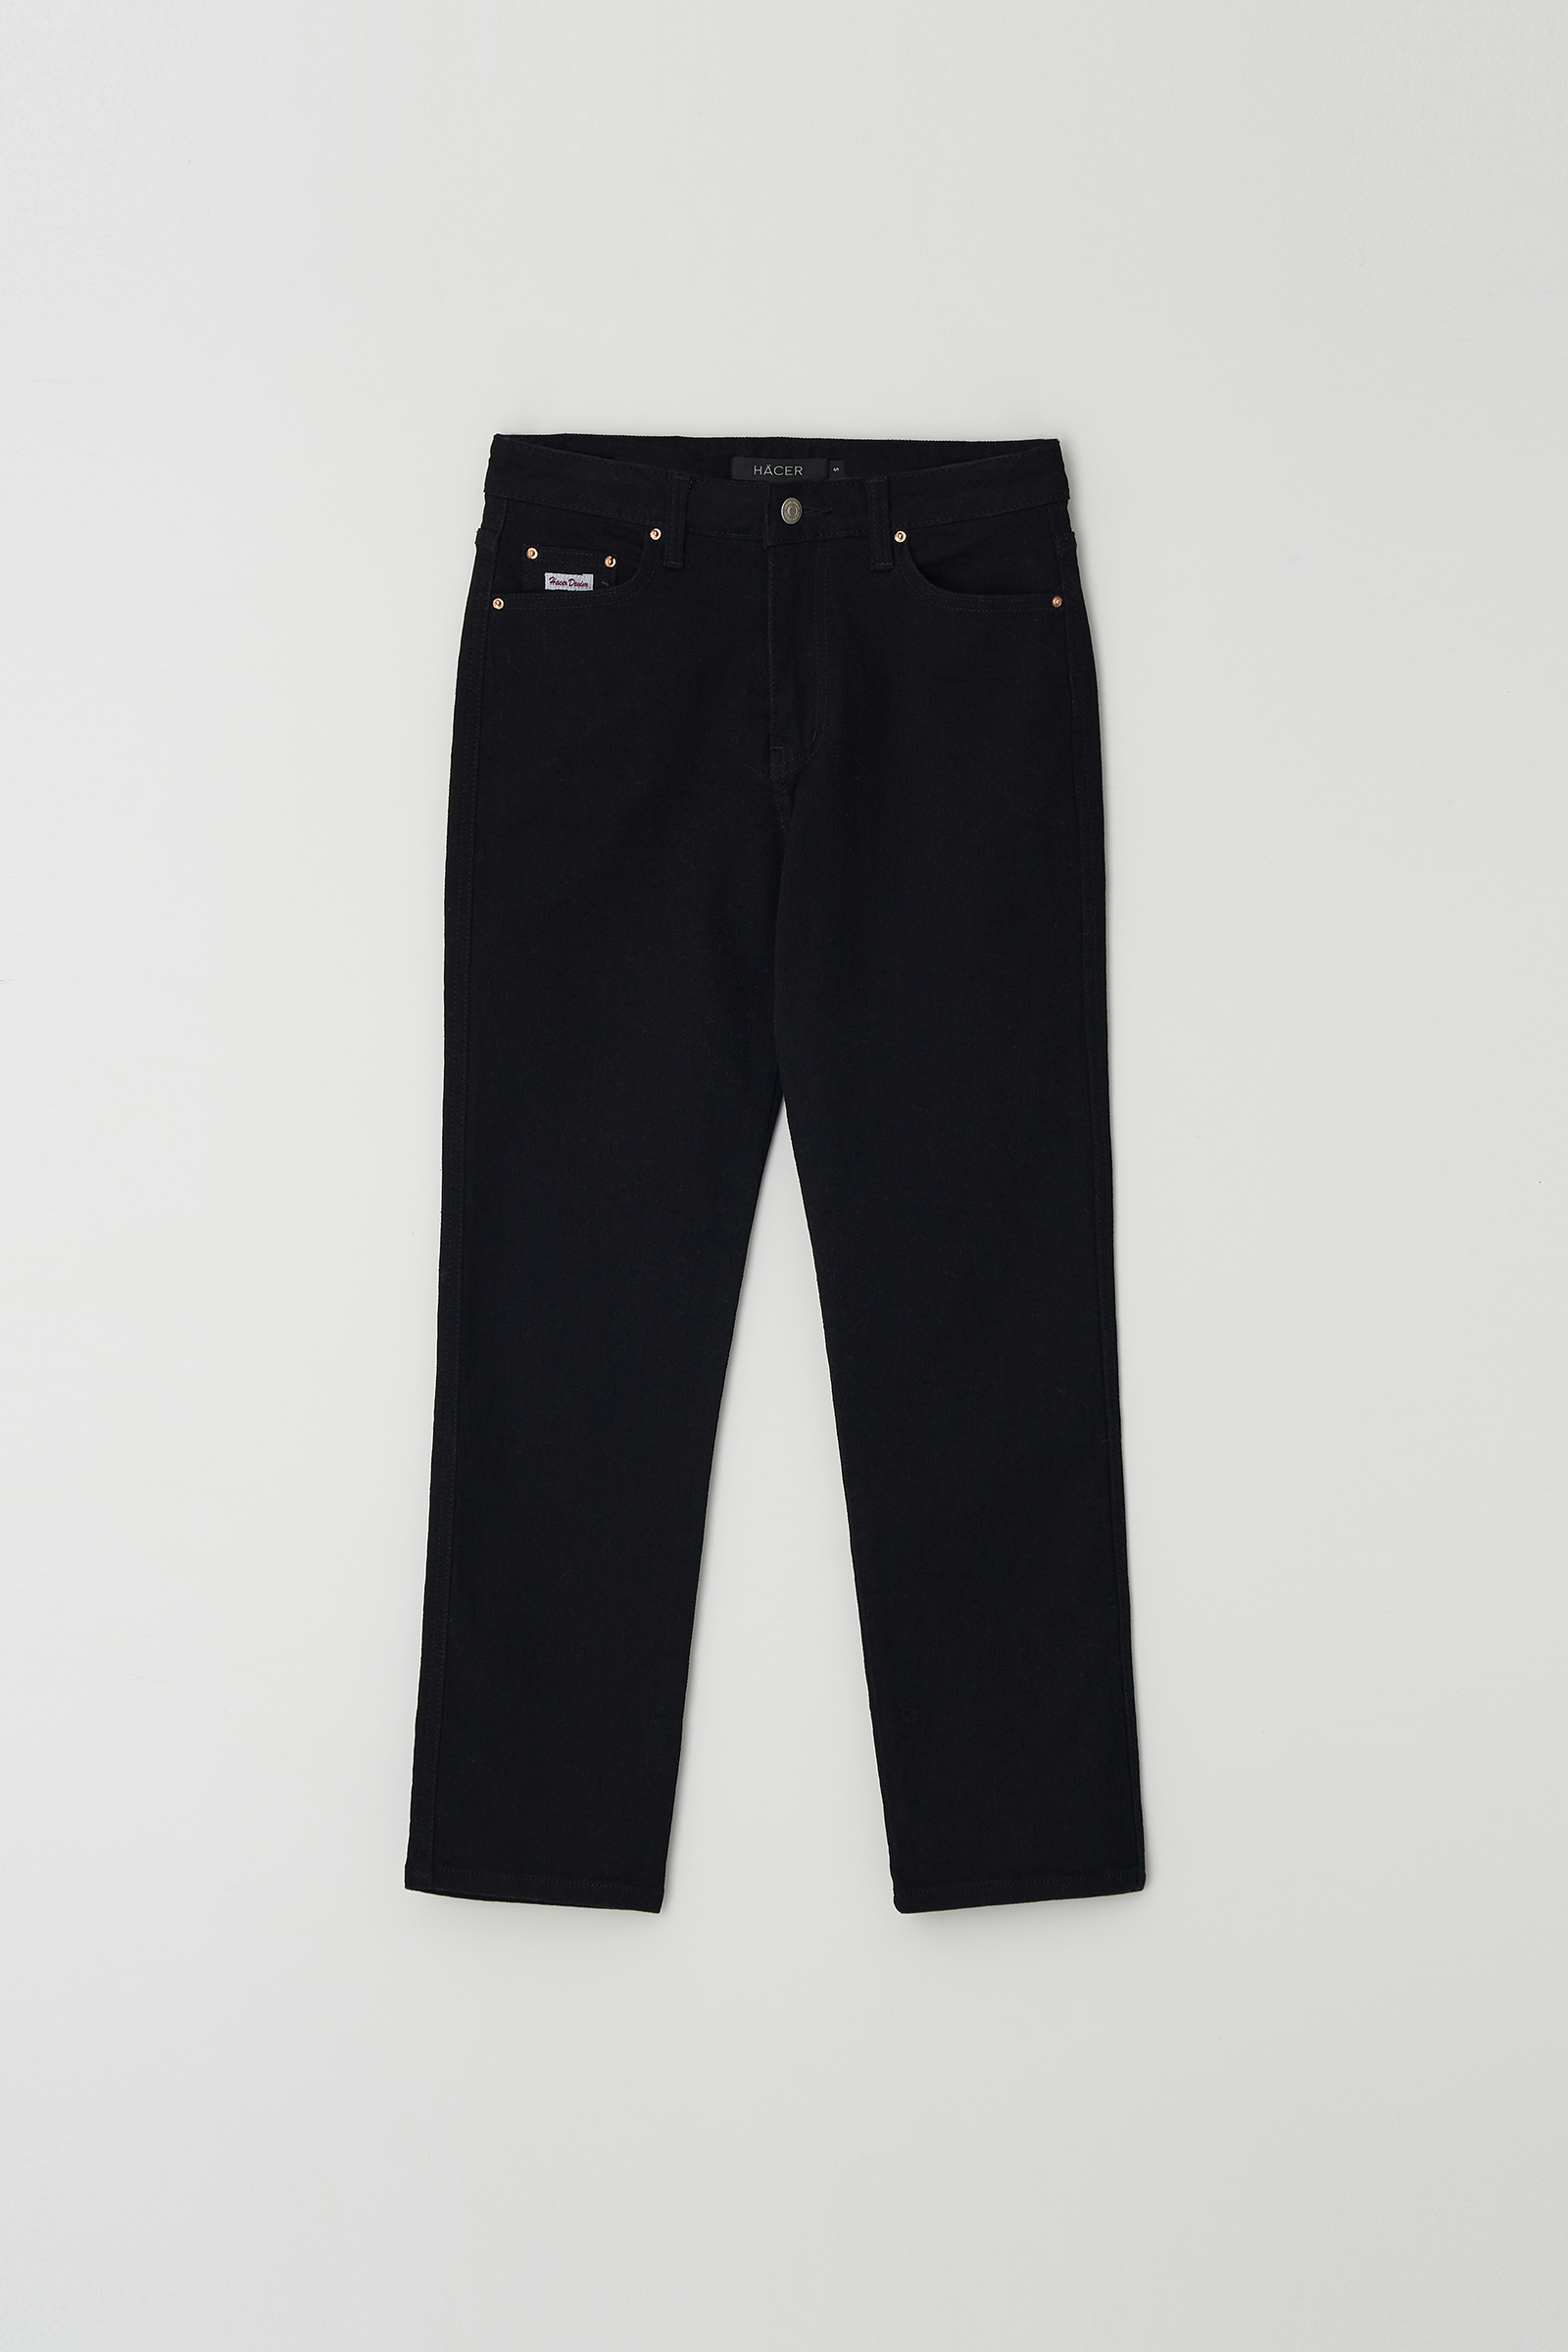 [3rd] Black Cropped Jeans